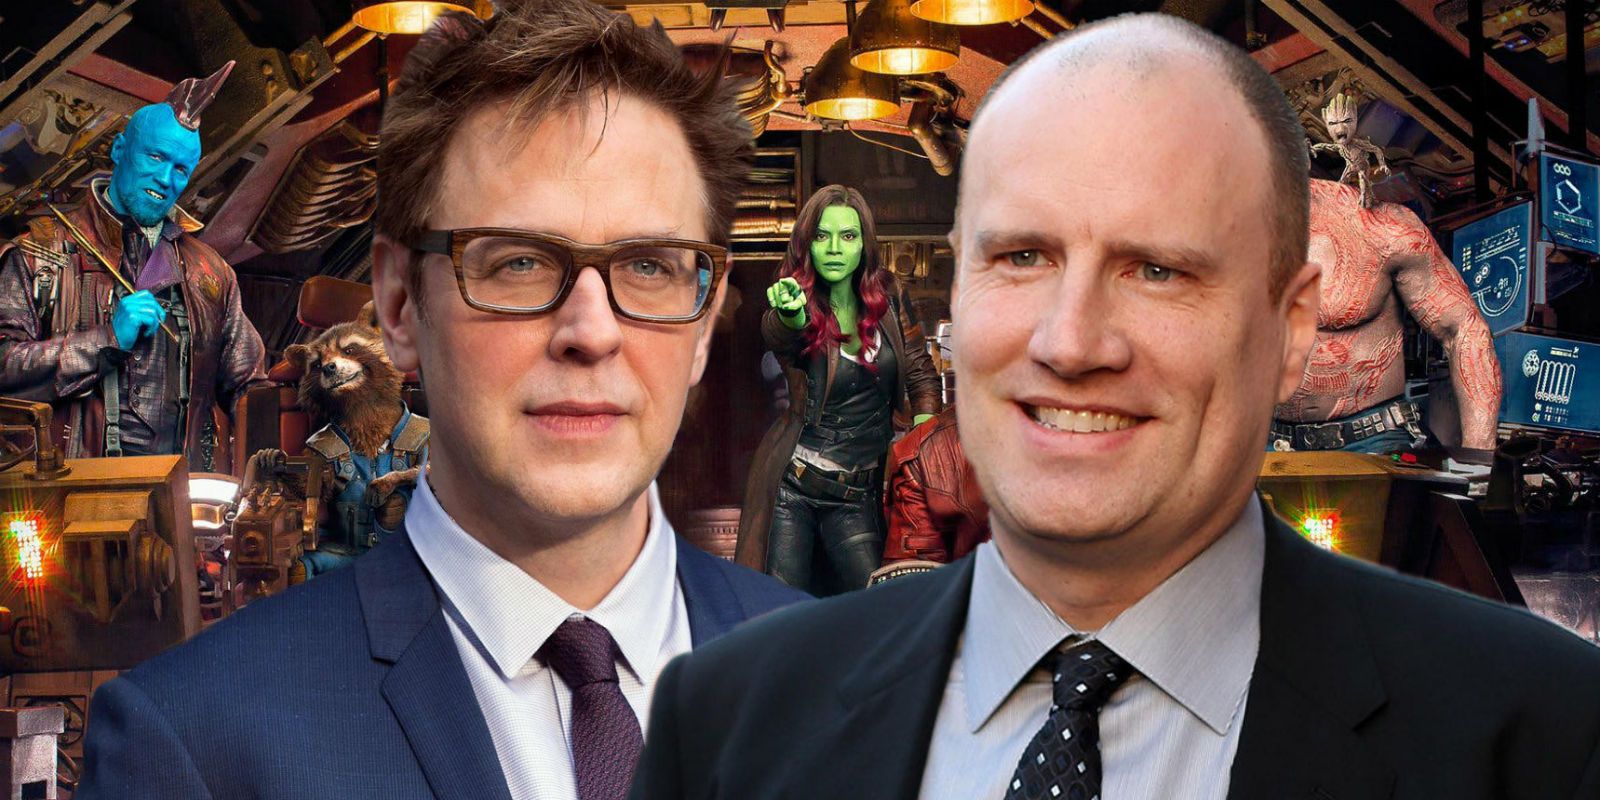 Kevin Feige Says James Gunn's MCU Role Was 'Blown Out of Proportion'